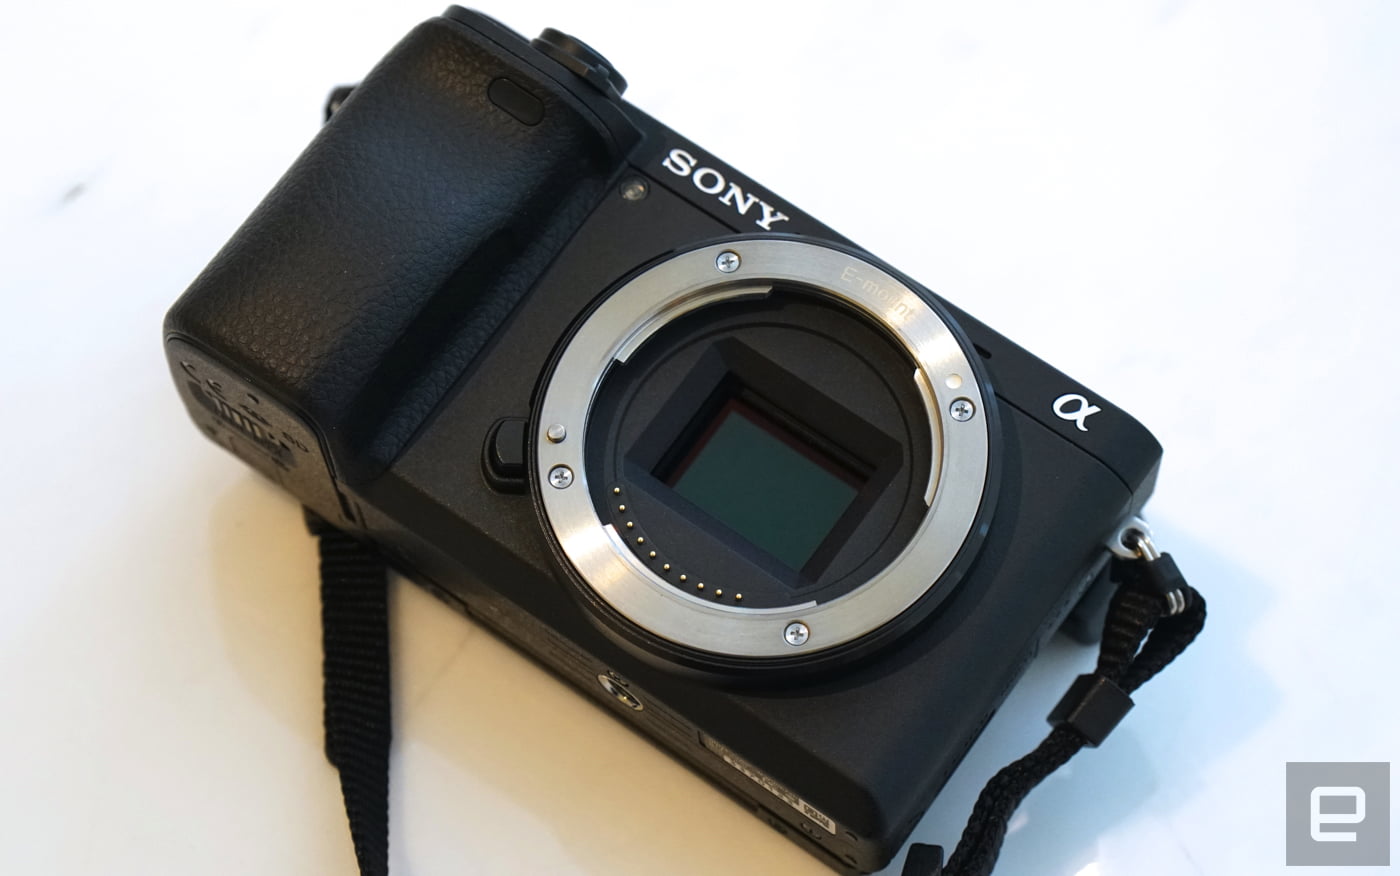 Sony’s A6300 is a breakthrough for mid-tier mirrorless cameras